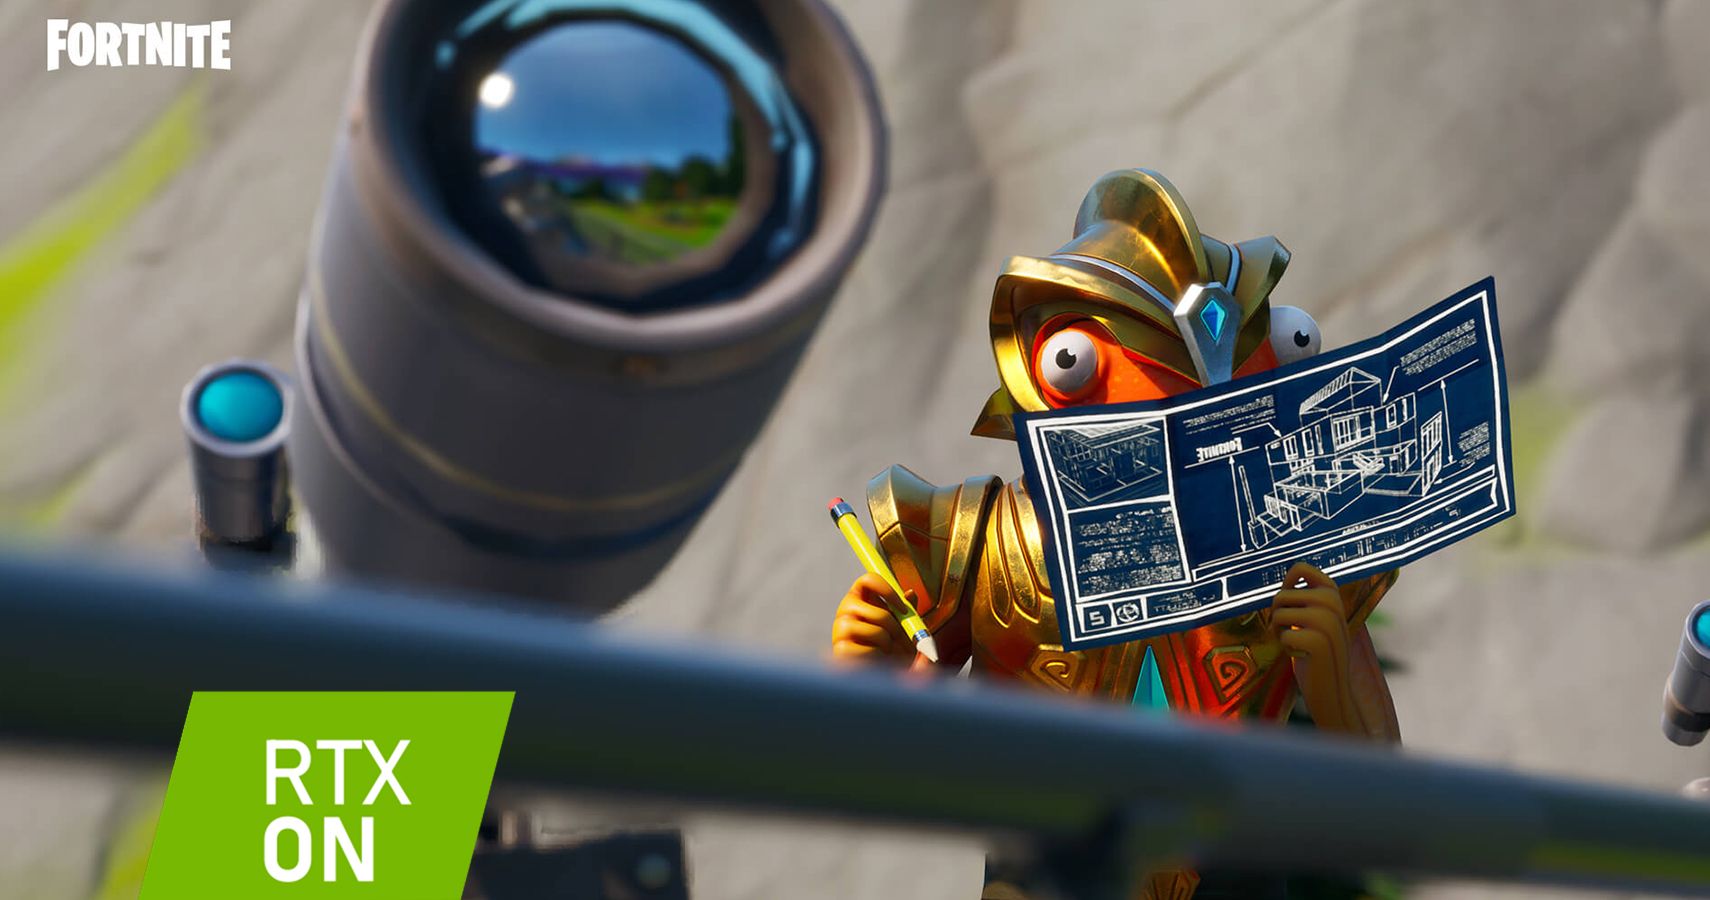 Fortnite With Raytracing RTX On stamp